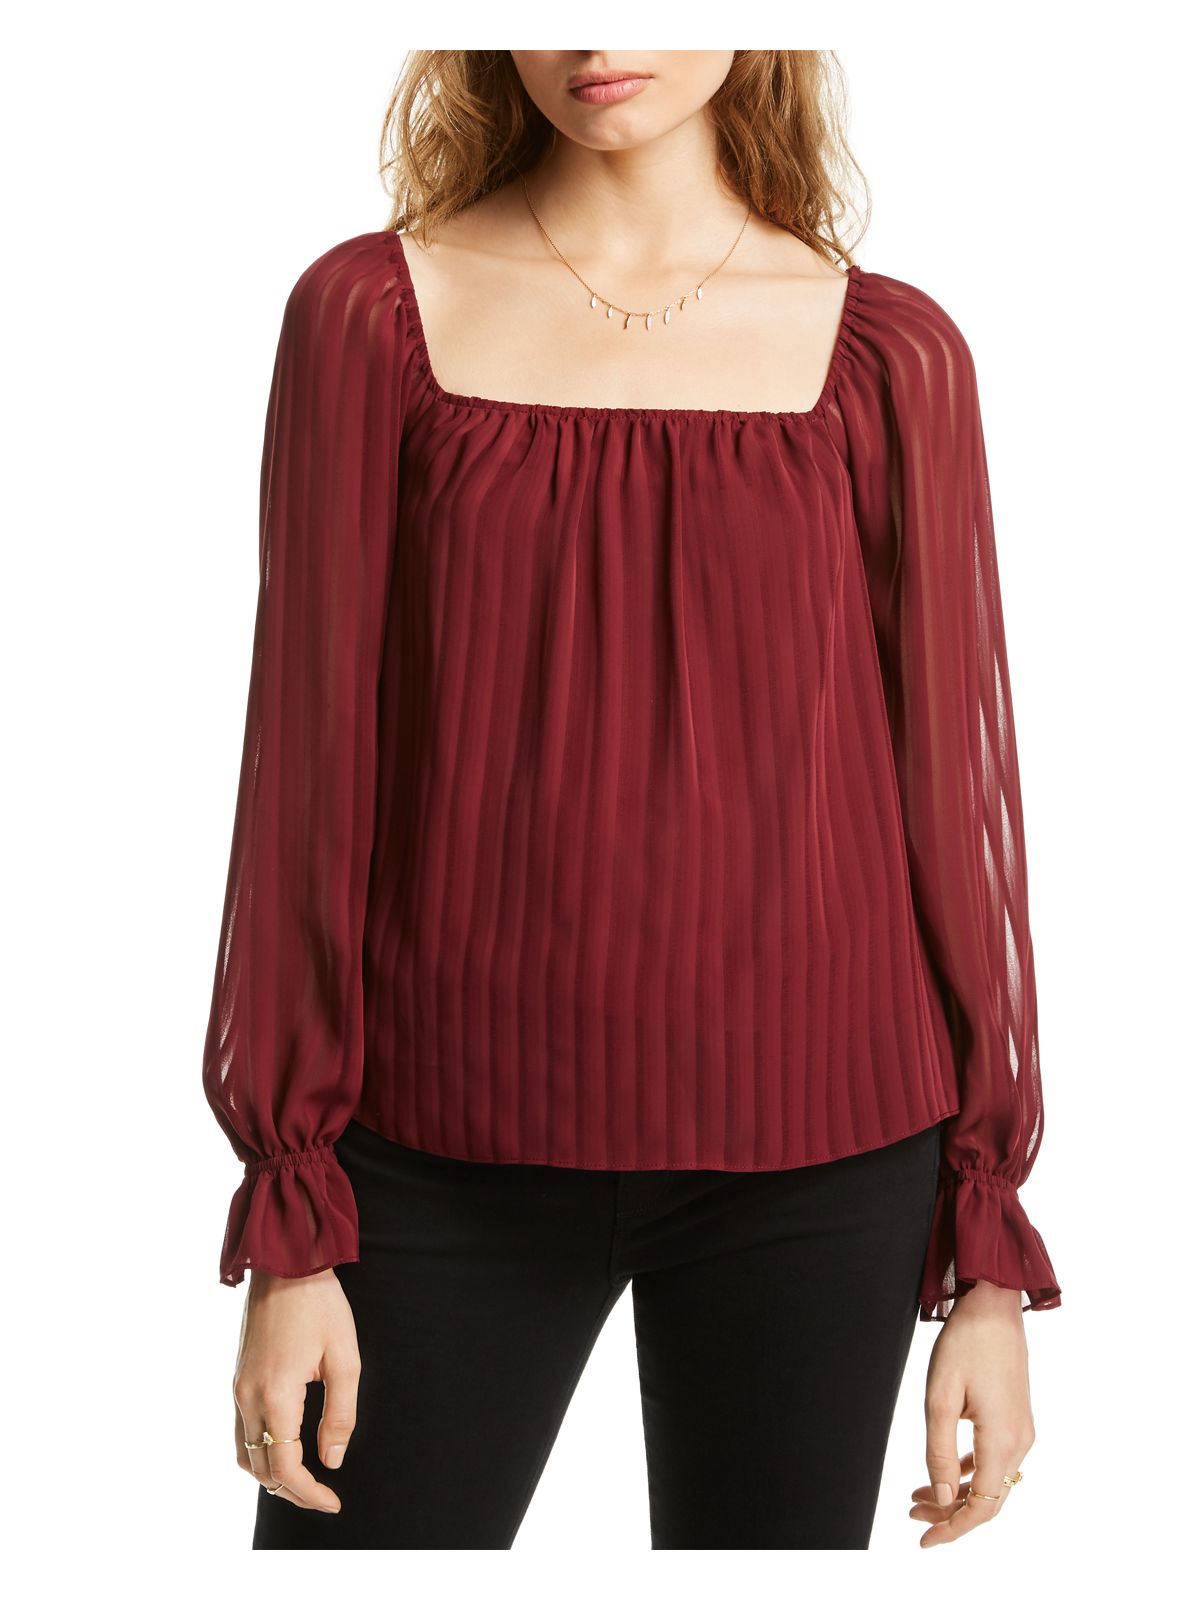 LINI Womens Burgundy Striped Long Sleeve Square Neck Blouse Size: XS